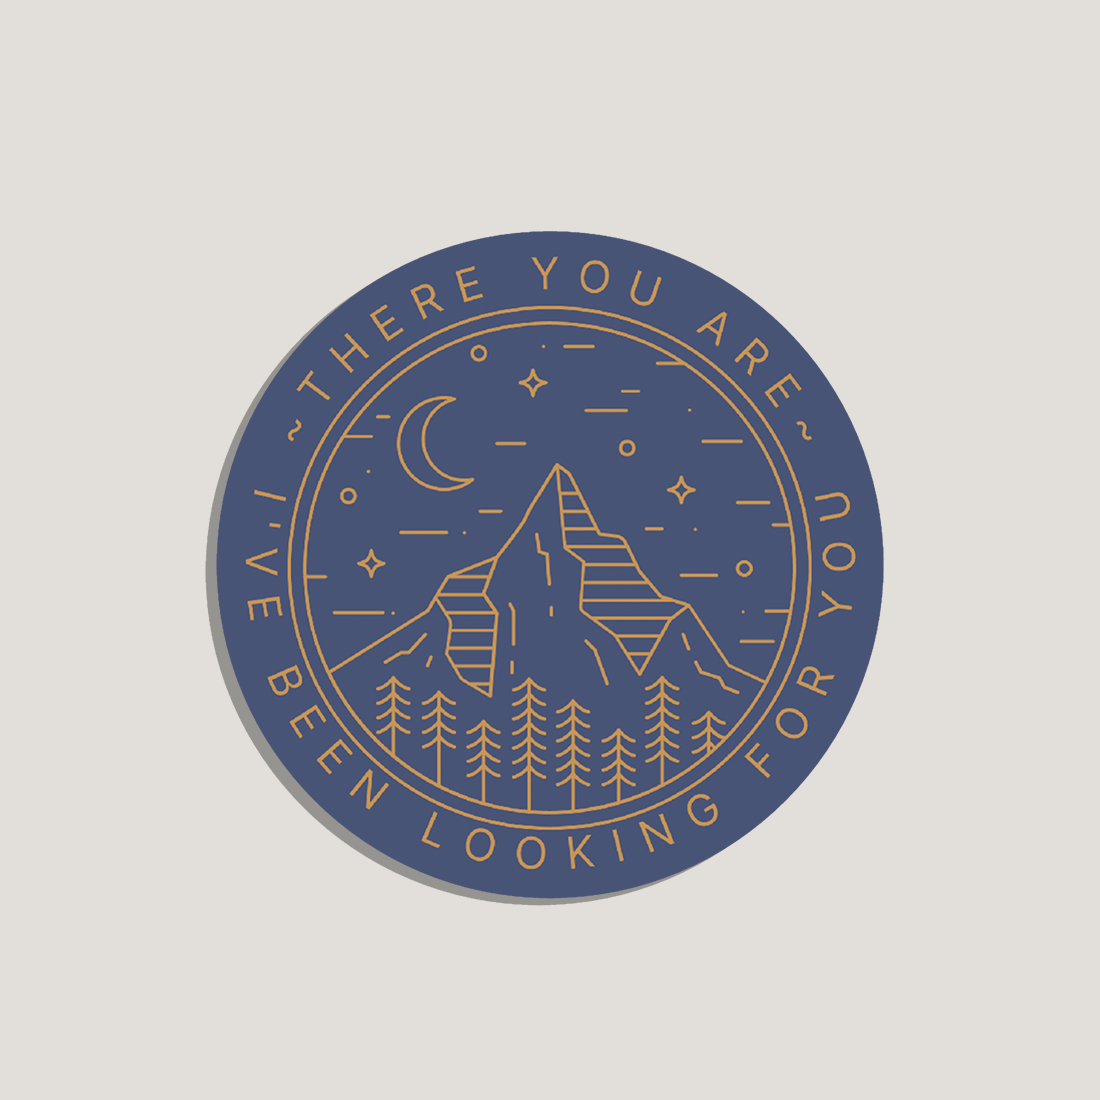 i've been looking for you acotar sticker – probably smut